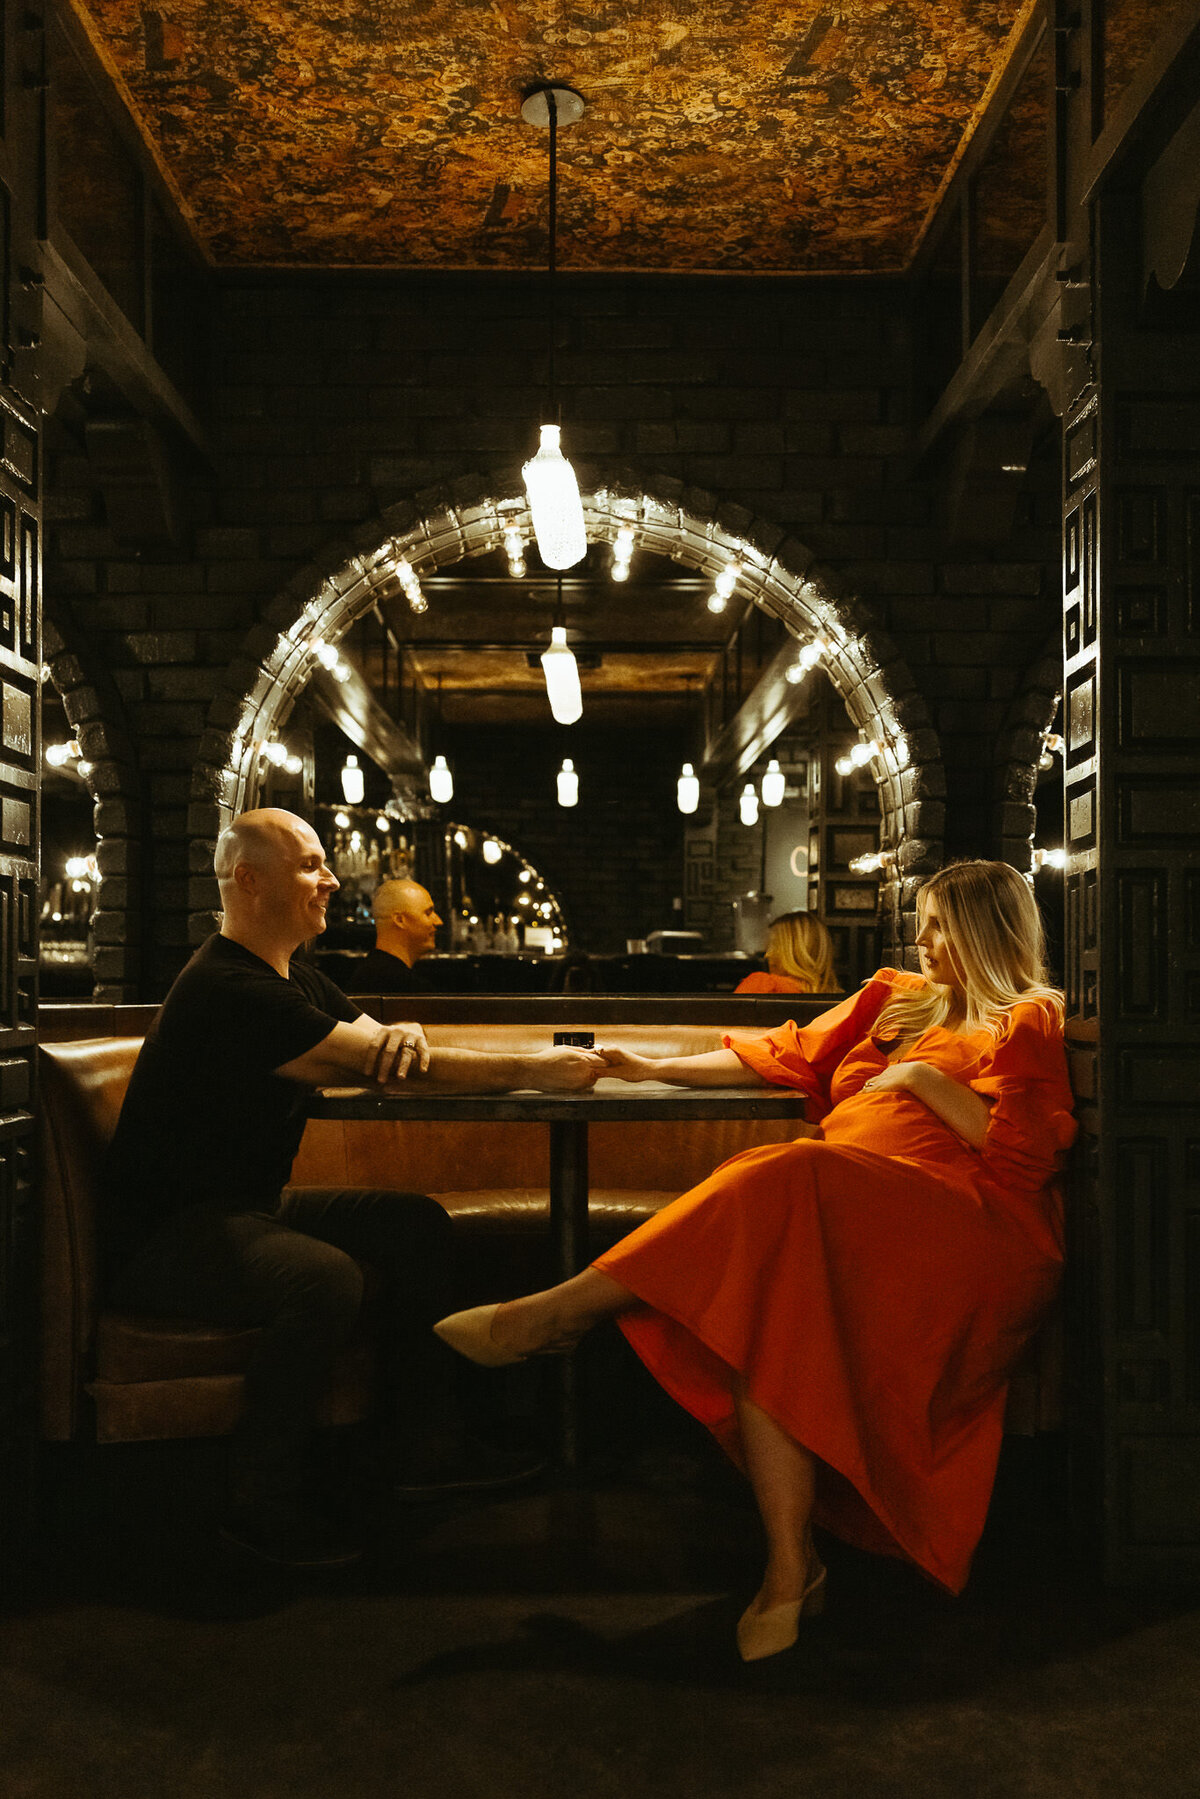 Maternity couple holds hands at table at Ace Hotel bar.  It is dark room with moody artificial lighting. Pregnant mom in orange dress and dad in black shirt.